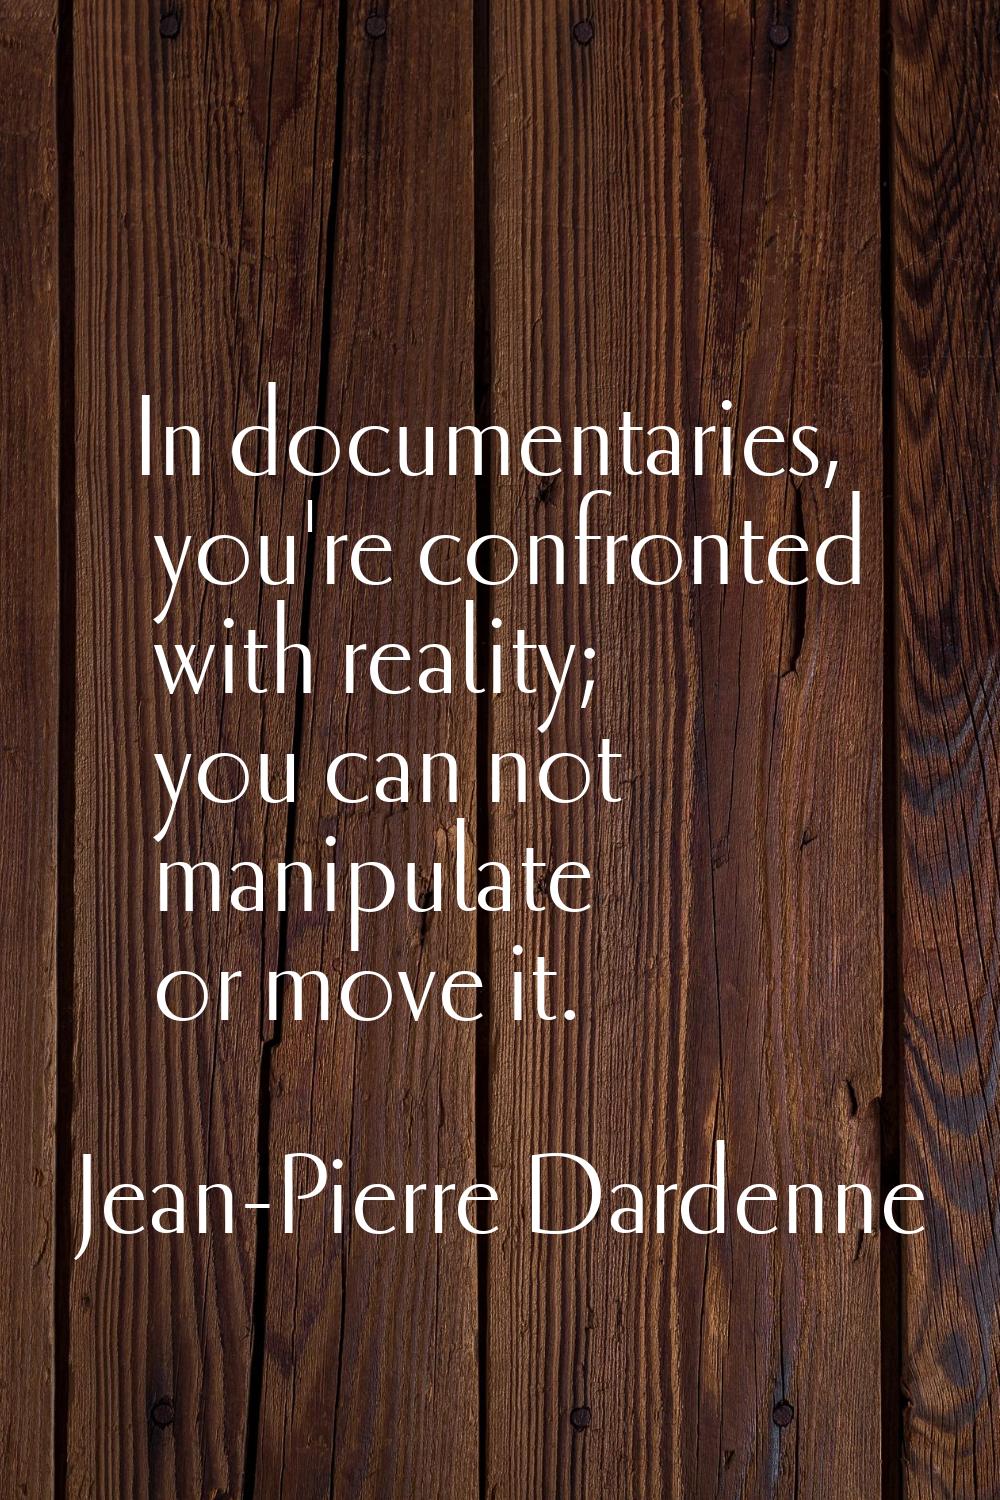 In documentaries, you're confronted with reality; you can not manipulate or move it.